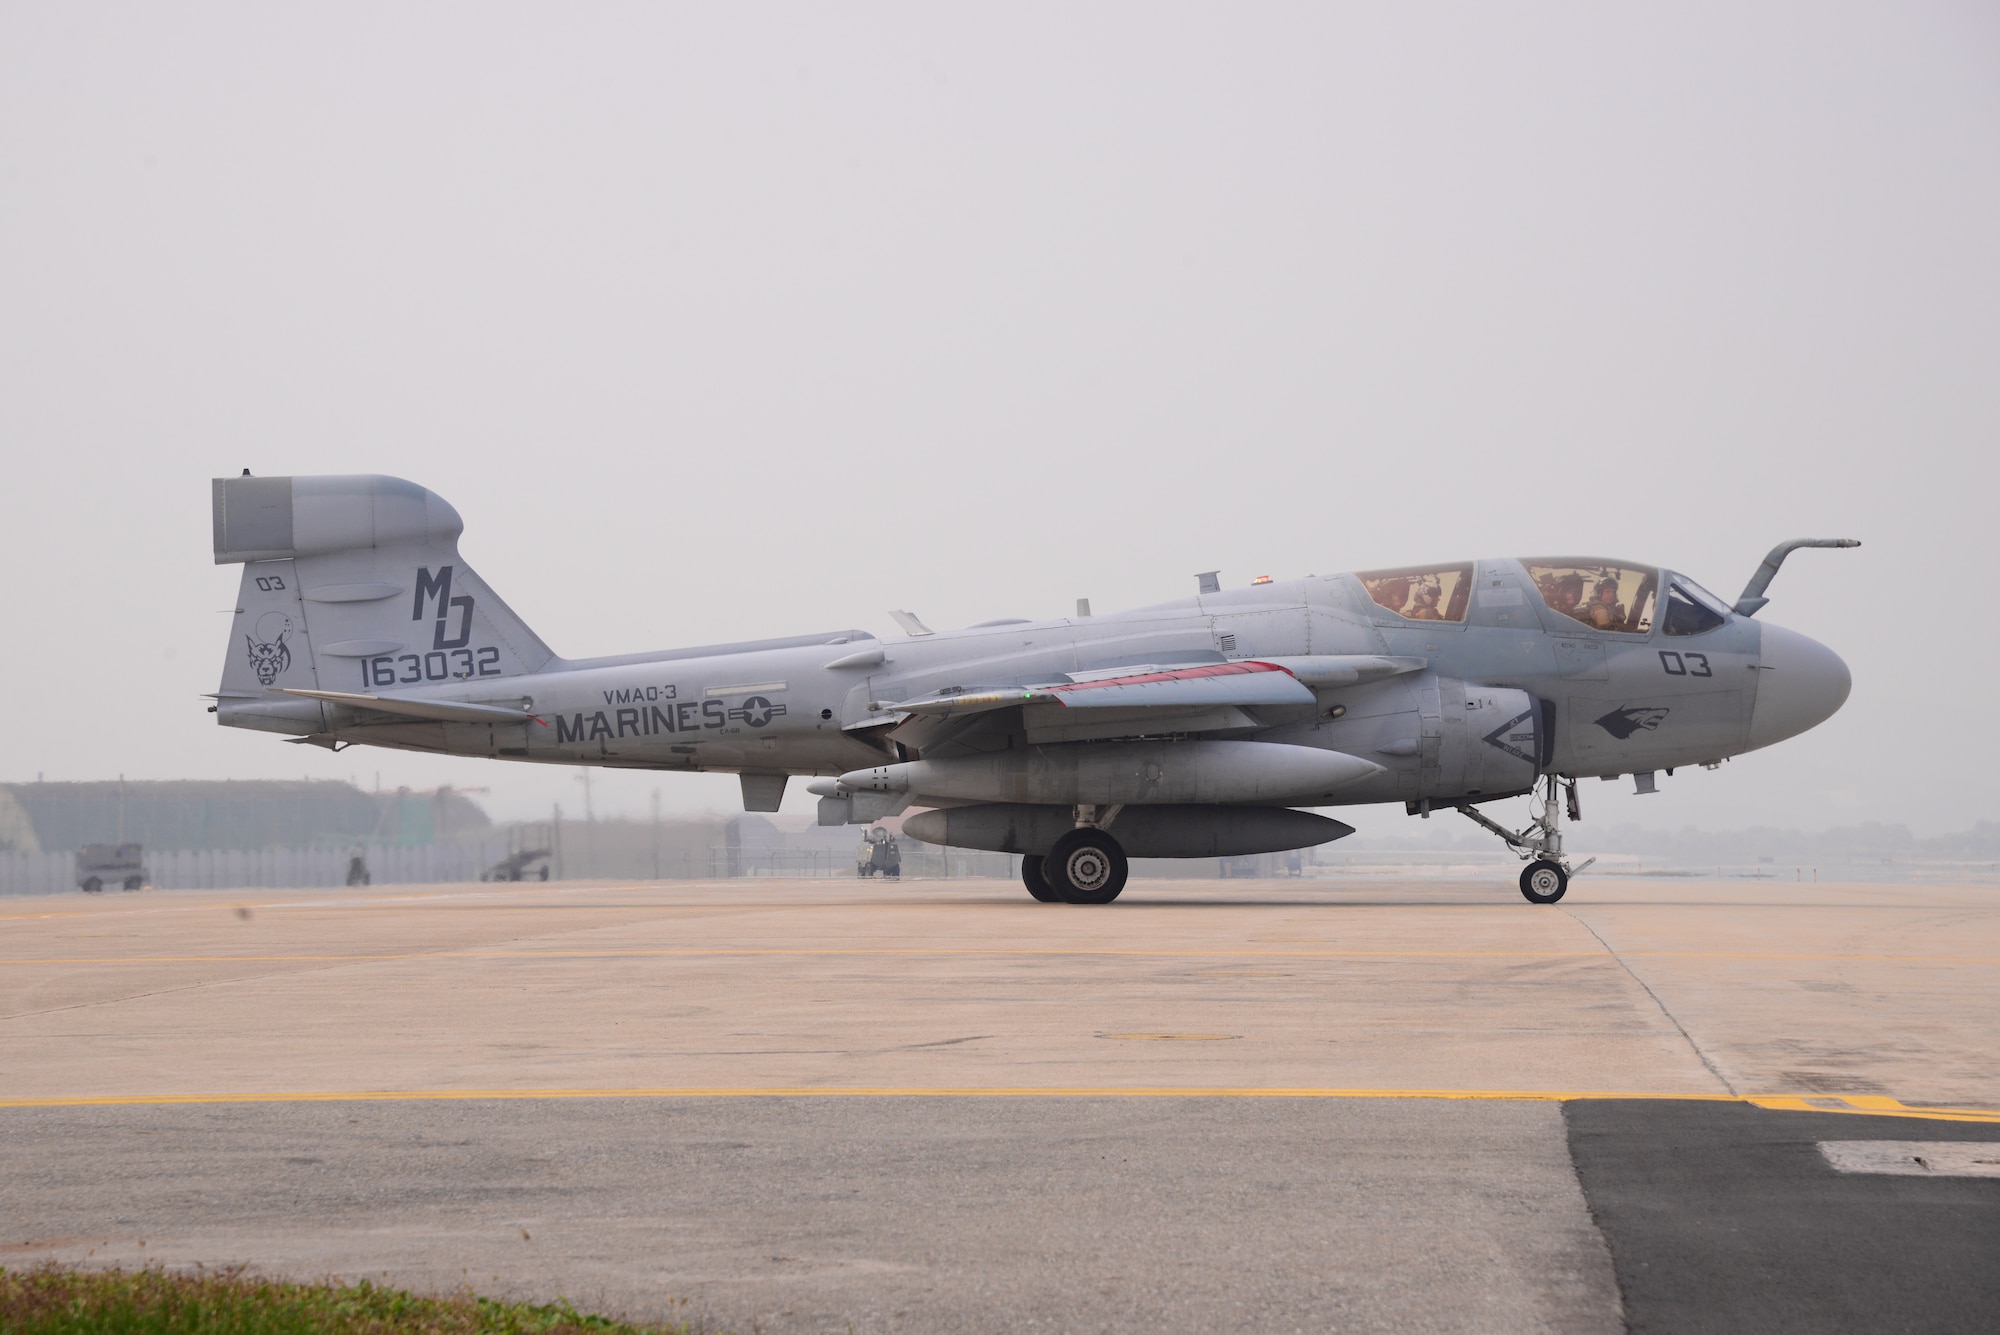 An EA-6B Prowler assigned to Marine Tactical Electronic Warfare Squadron 4 taxis toward the runway Oct. 16, 2015, at Osan Air Base, South Korea. The Marines participated in exercise Pacific Thunder 15-02. More than 10 different organizations and squadrons came together to participate in the two-week exercise. (U.S. Air Force photo/Staff Sgt. Benjamin Sutton)